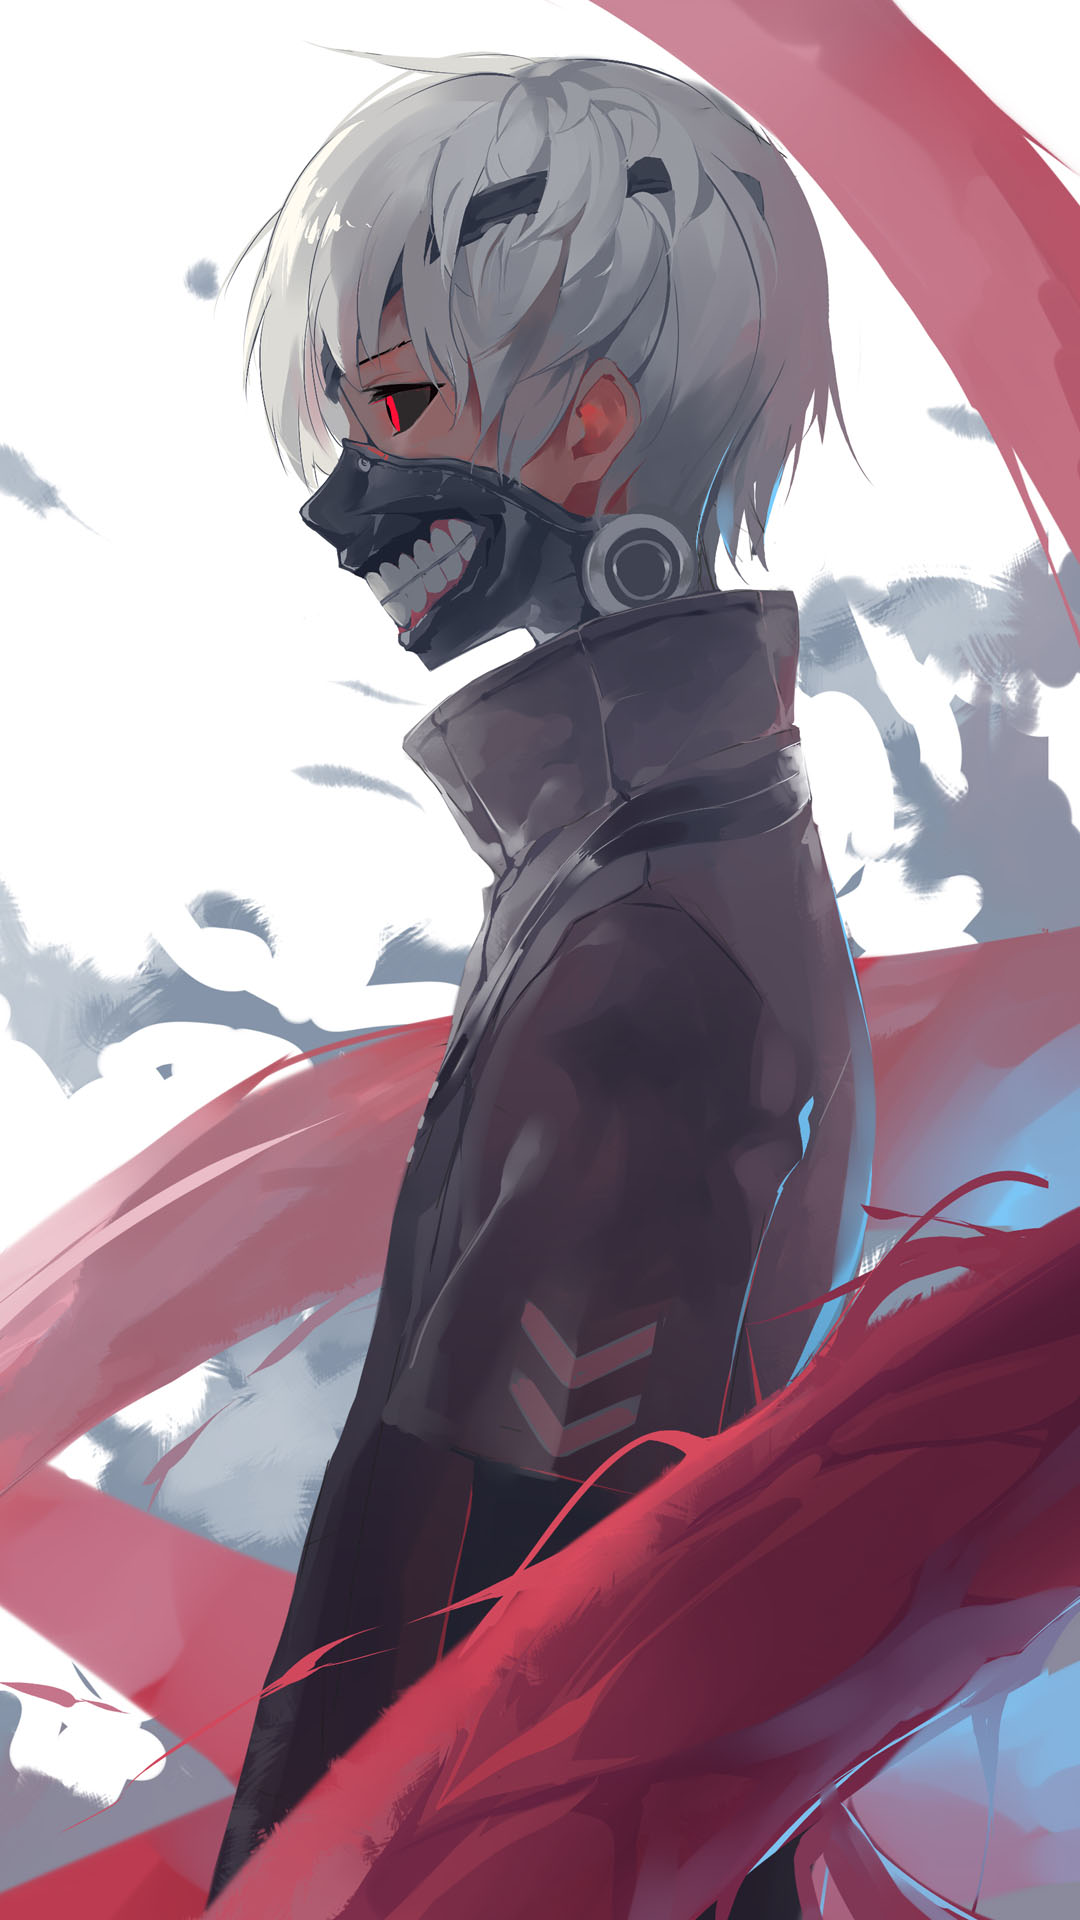 Tokyo Ghoul Anime Iphone Wallpapers Iphone Wallpapers